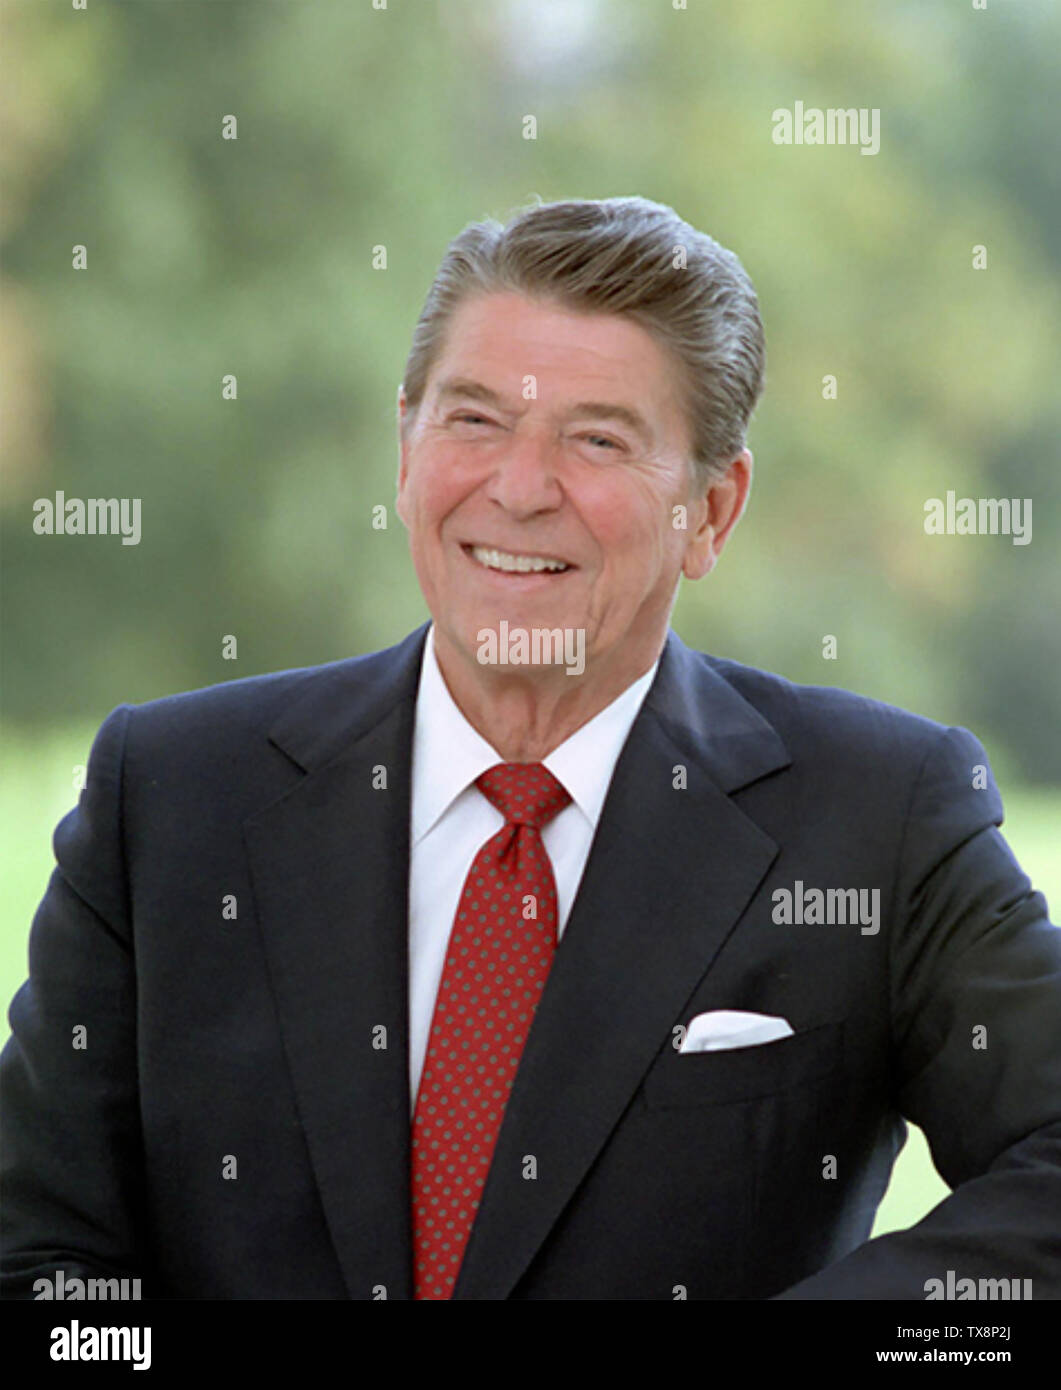 RONALD REAGAN (1911-2004) as 40th President of the United States about 1982 Stock Photo